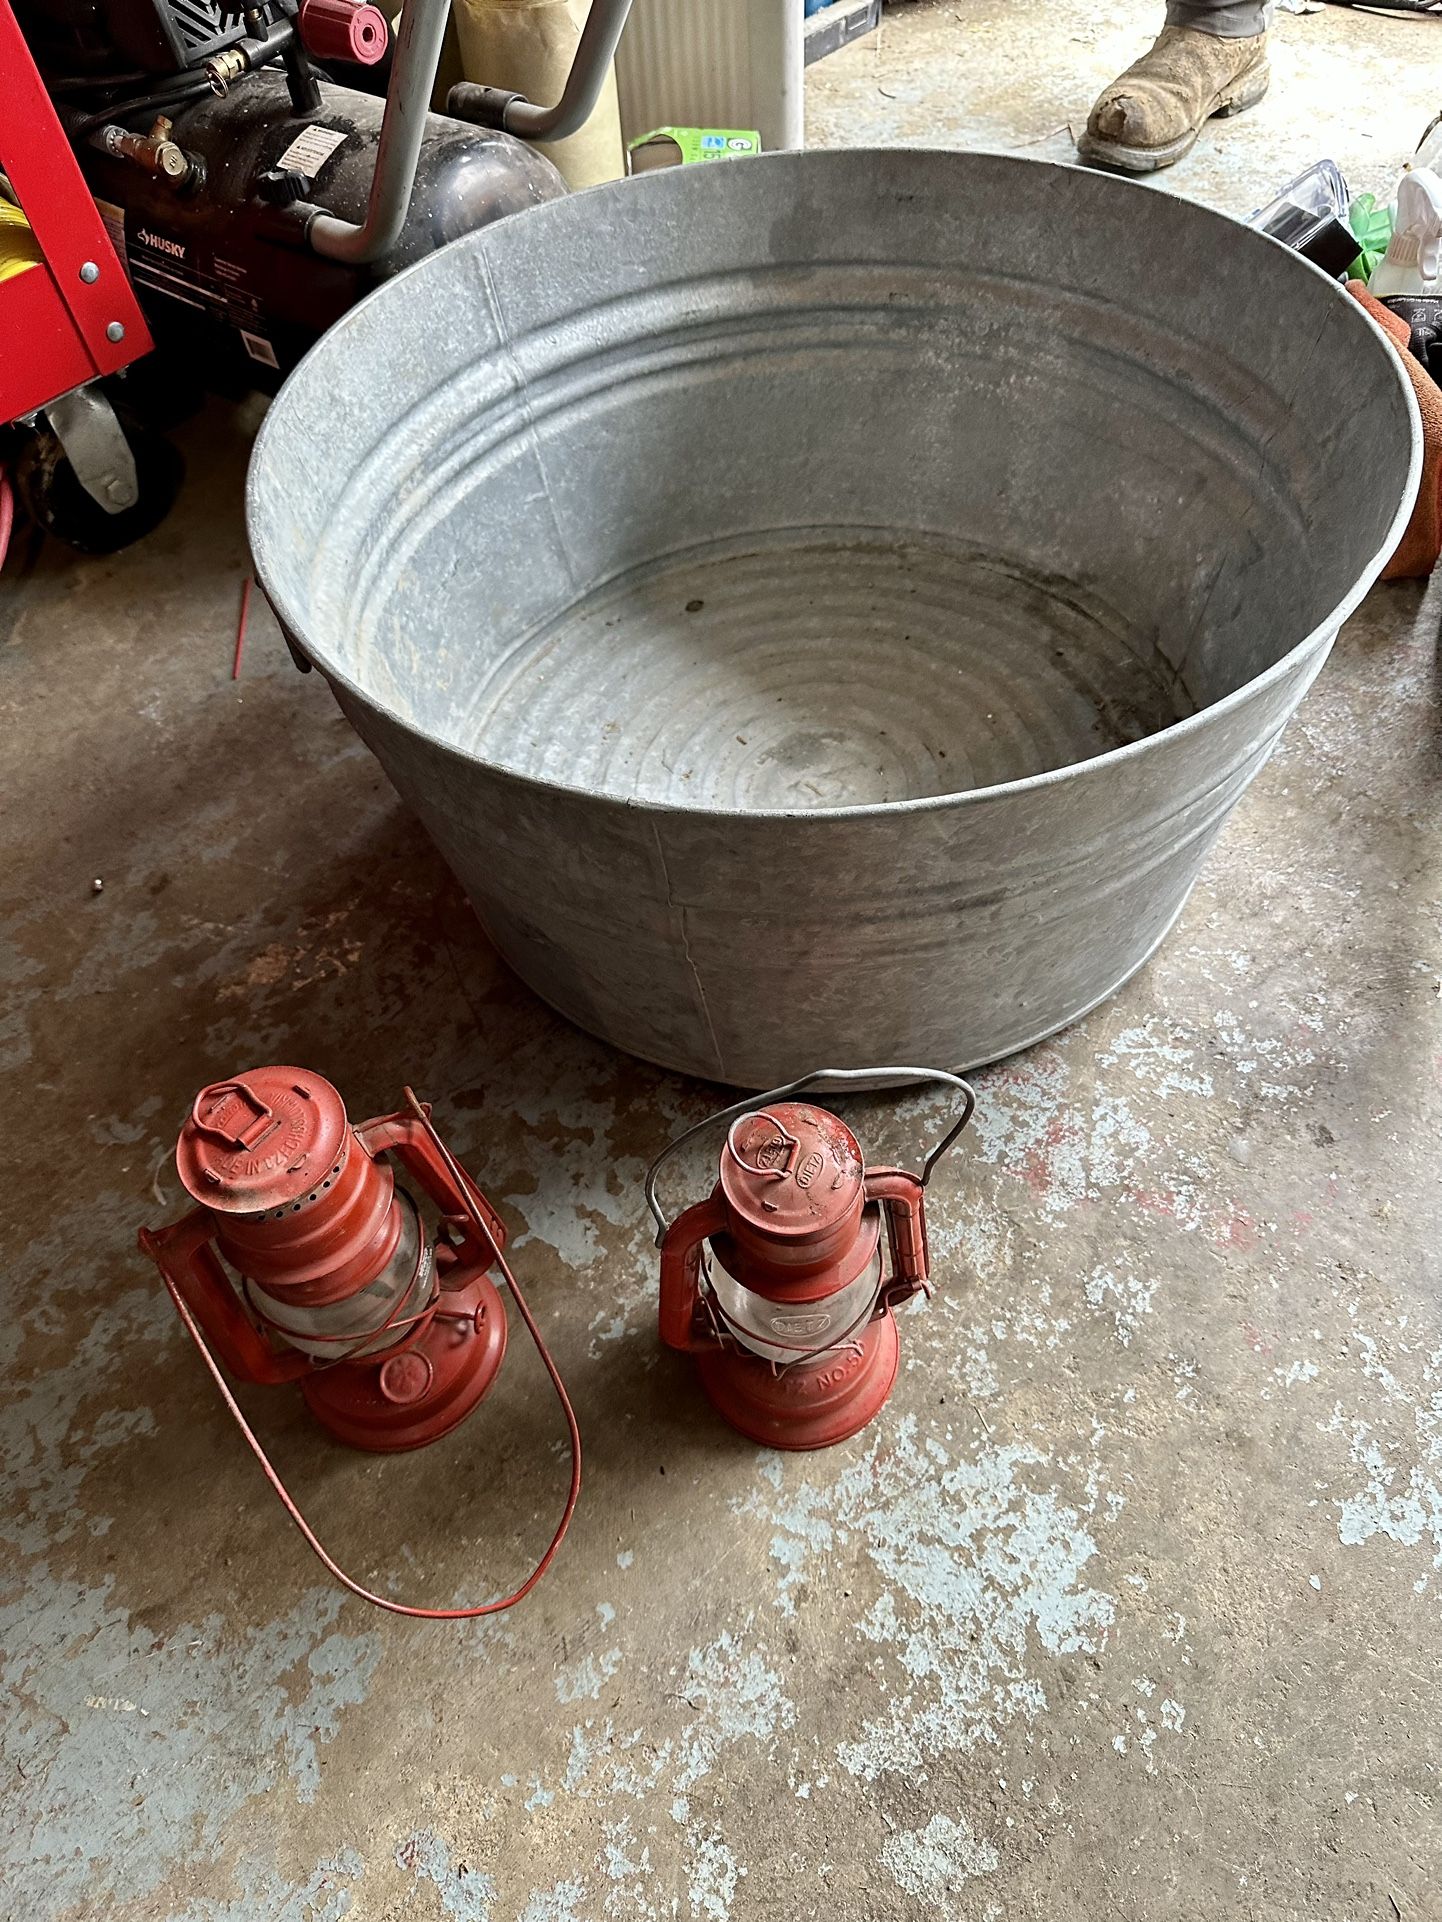 Big old bucket and lamps lanterns the bucket holds water no leaks 2ft w 1ft deep